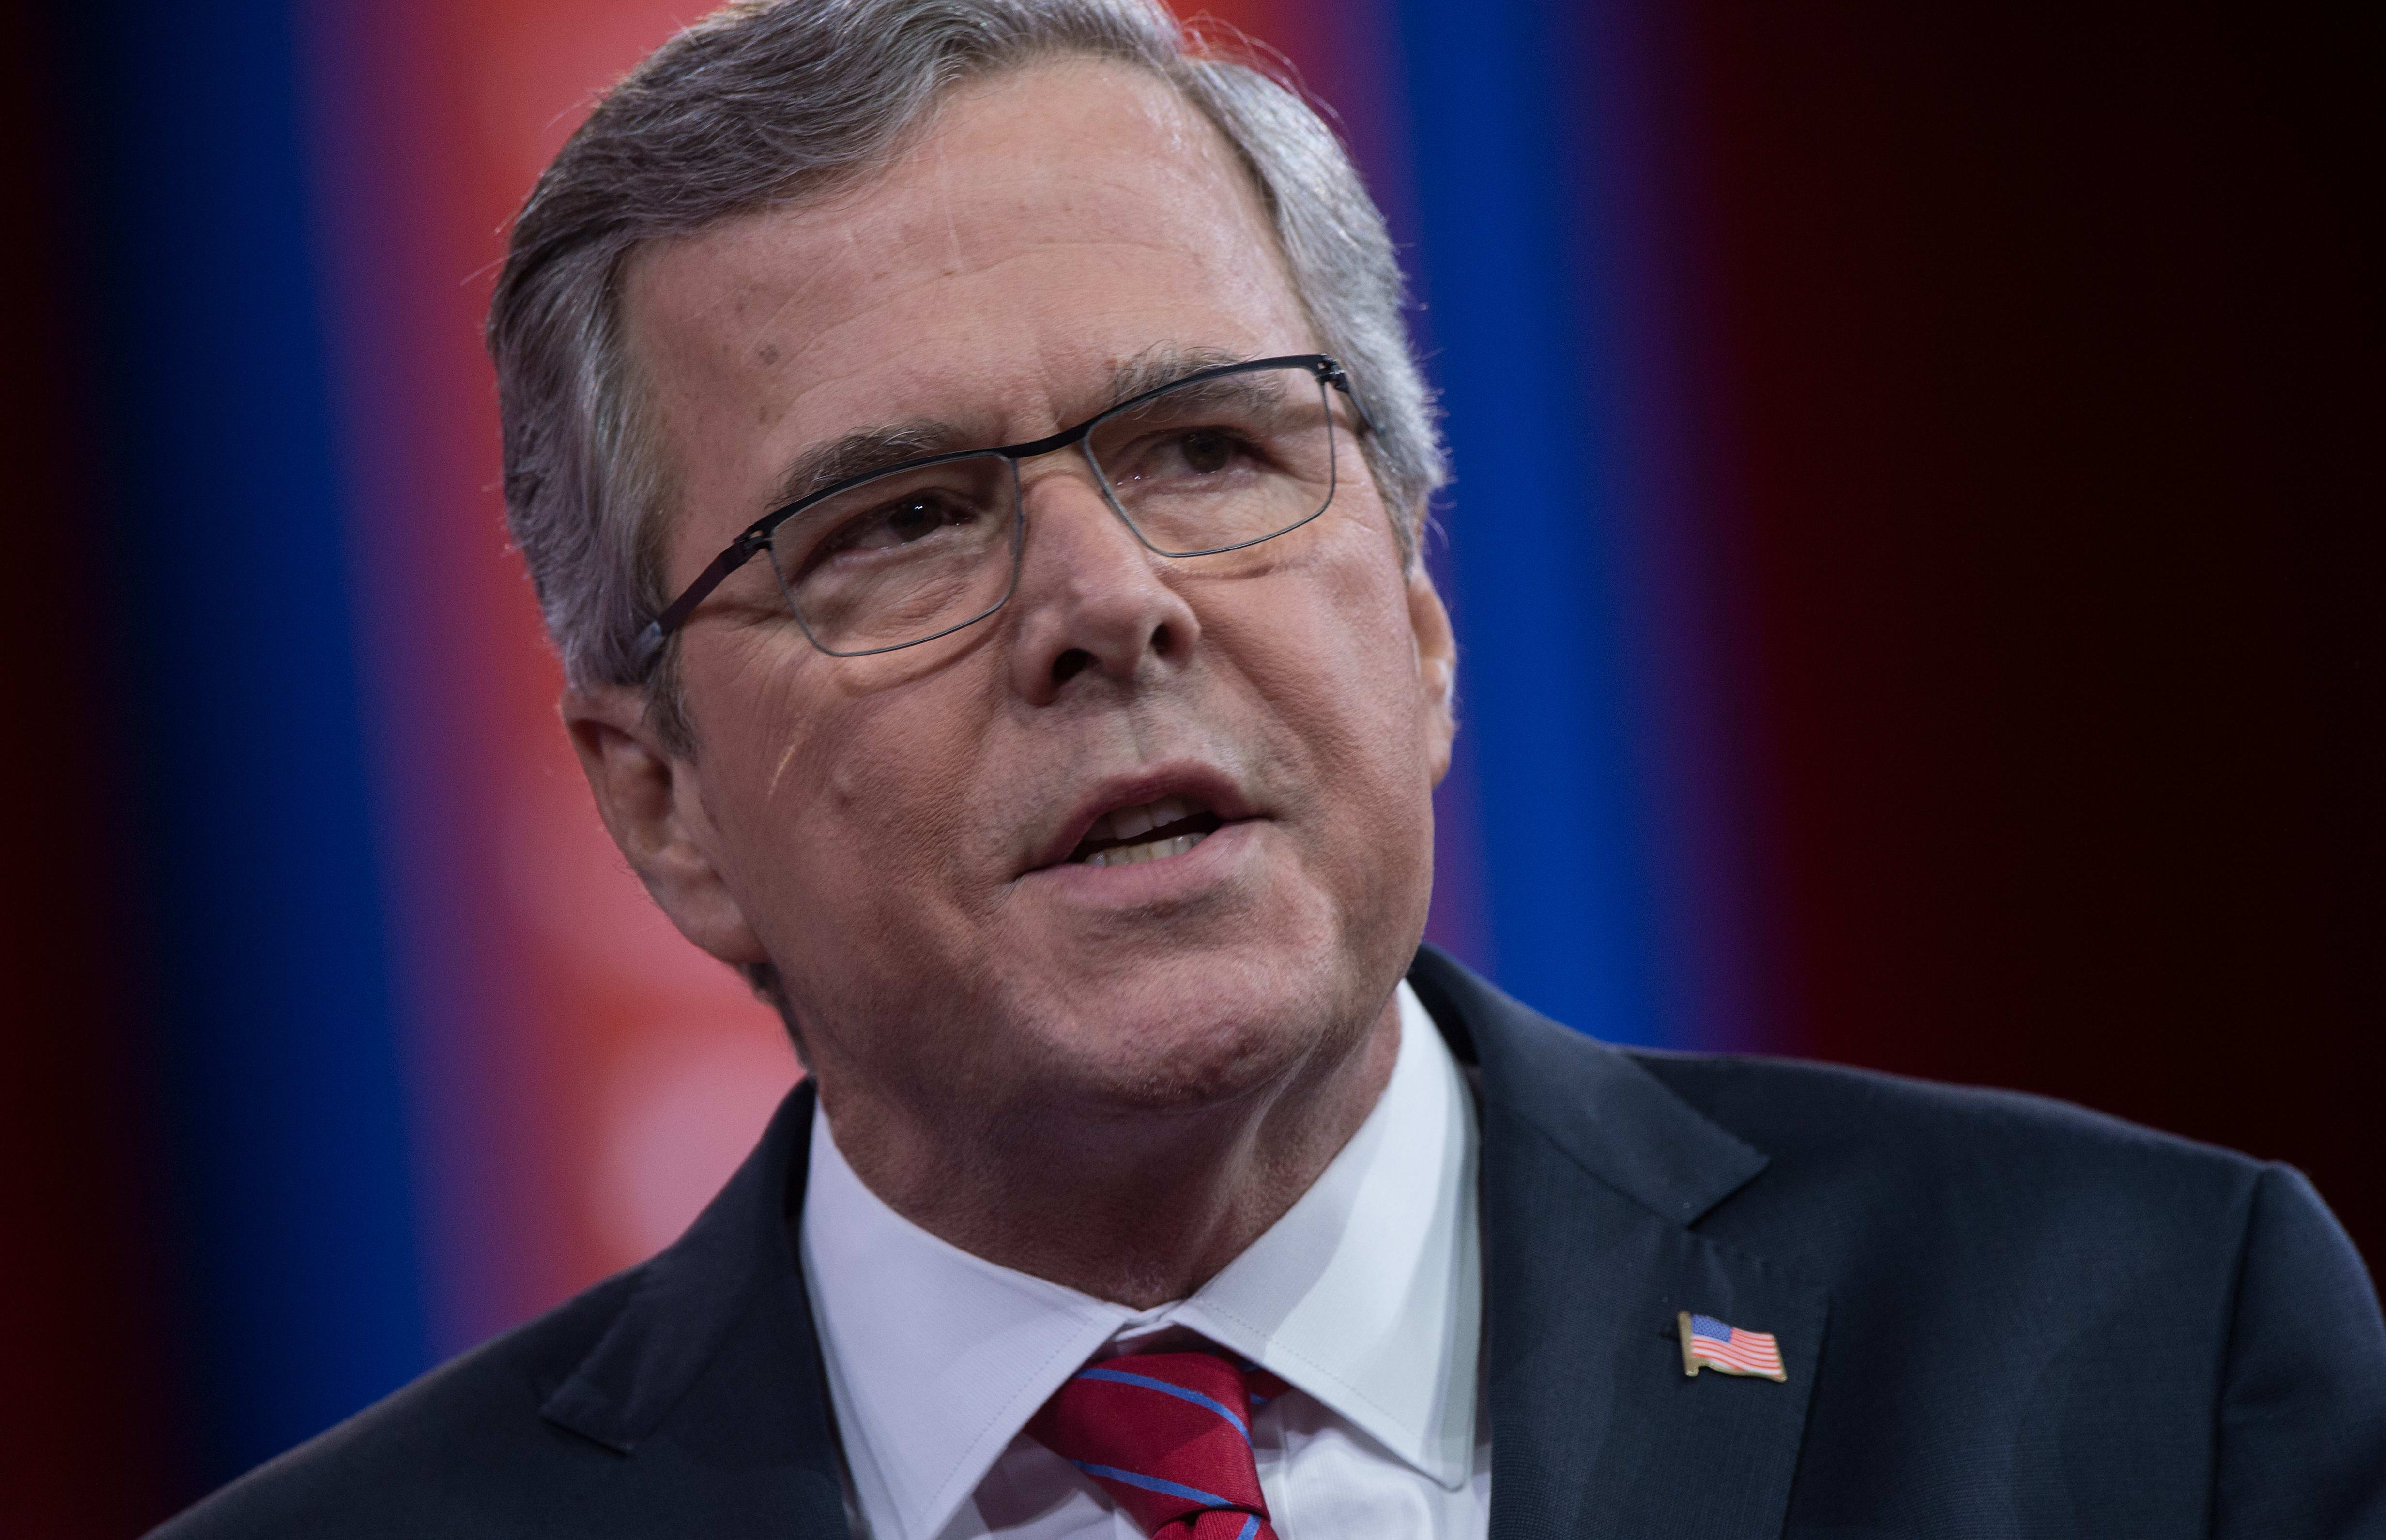 Jeb Bush has officially launched his US presidential campaign.